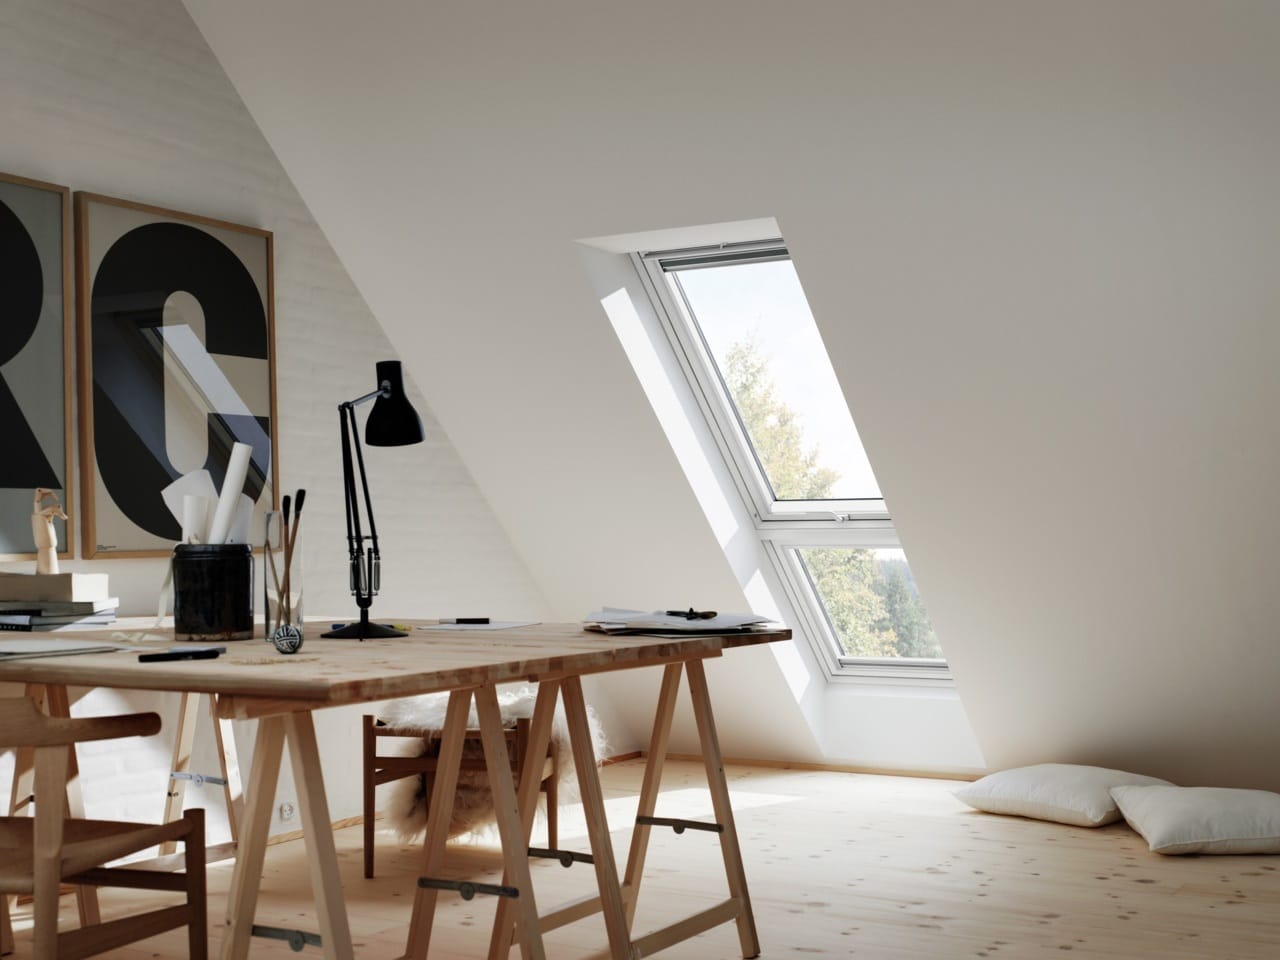 Home office studio in an attic with a skylight touching the floor